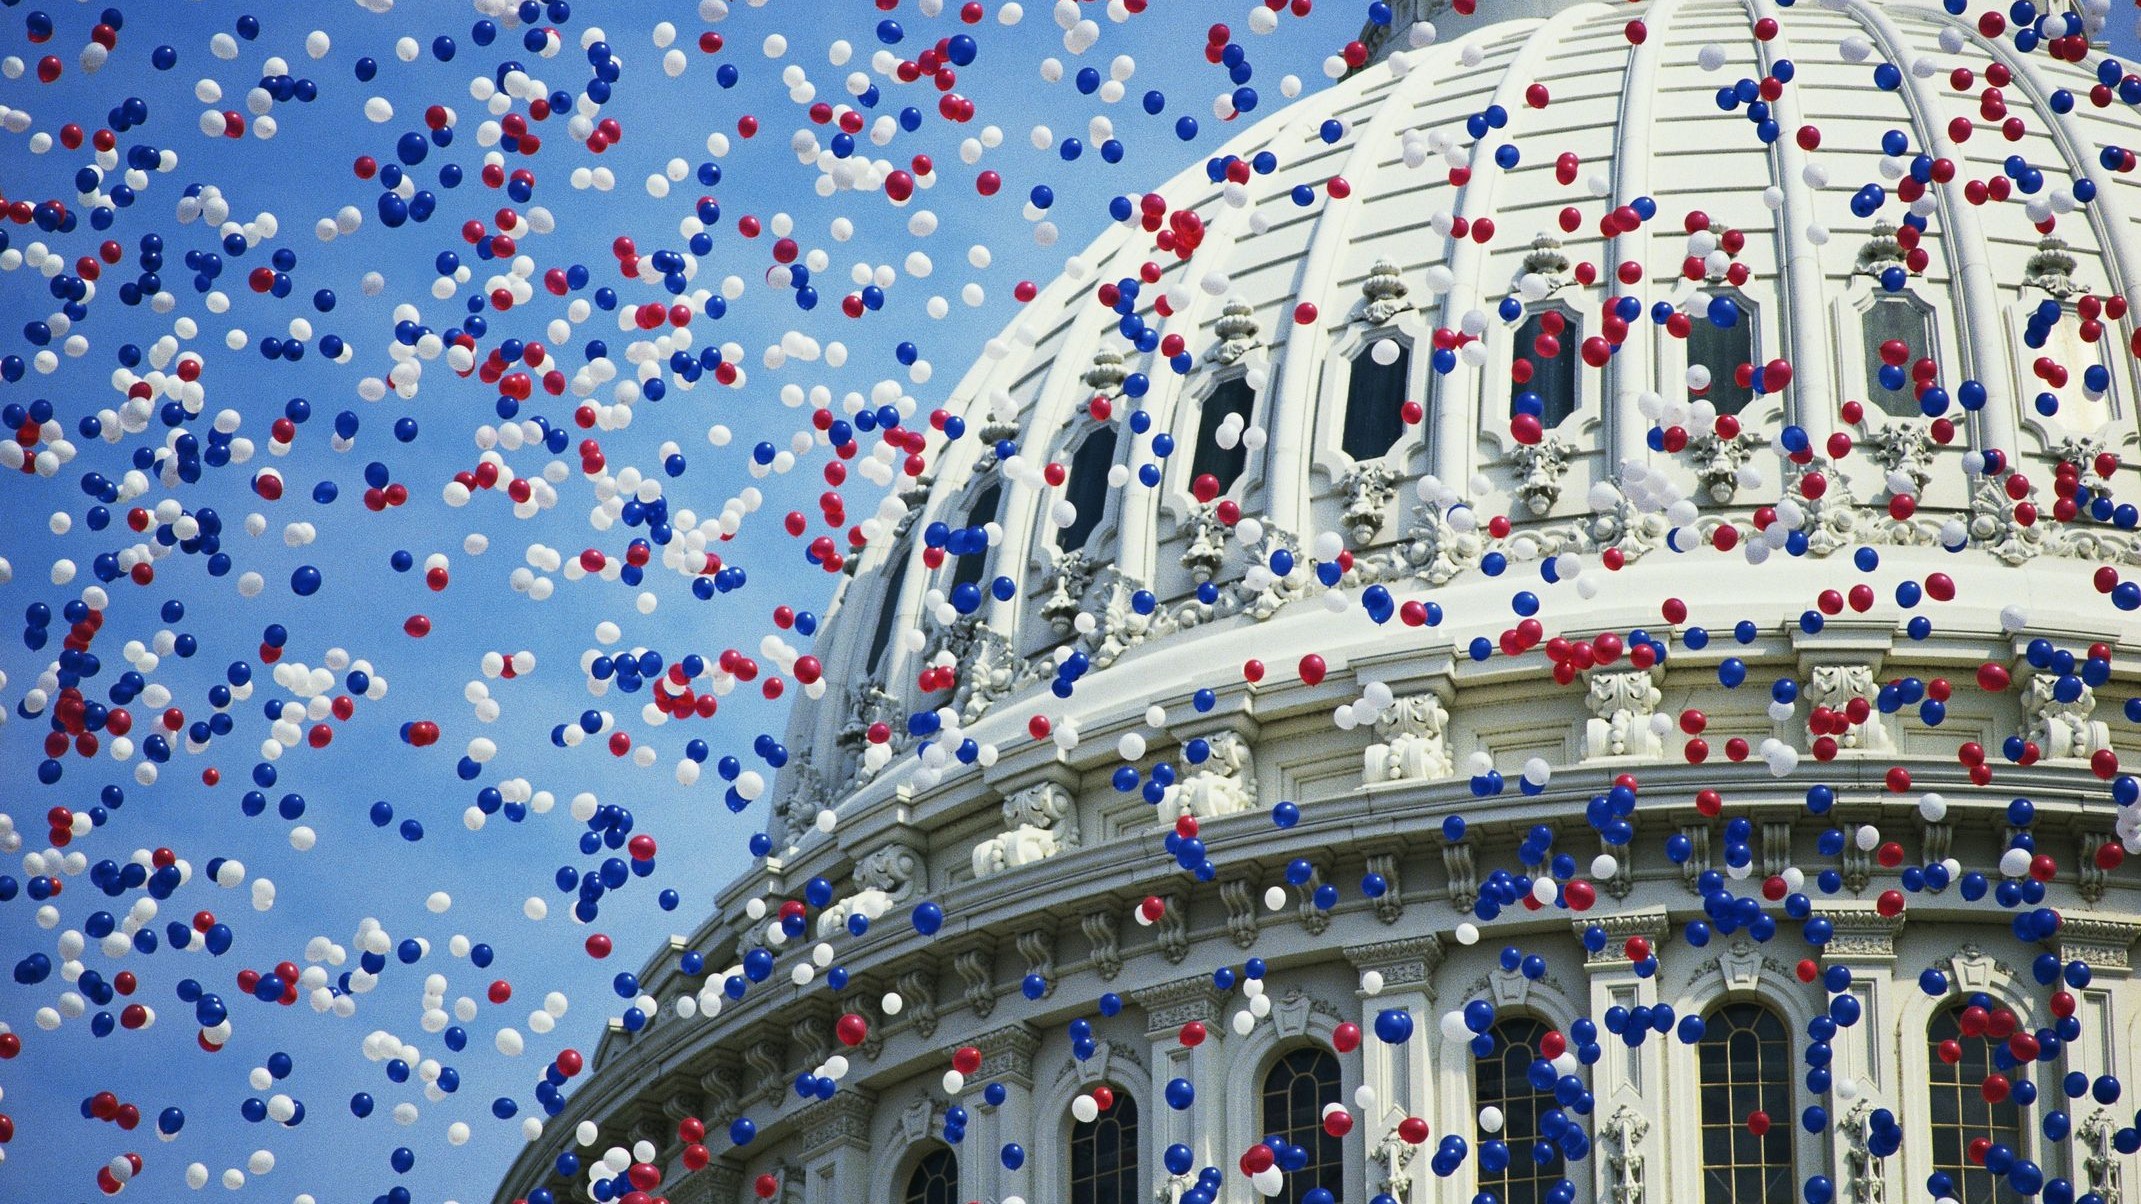 Blue, red and white balloons